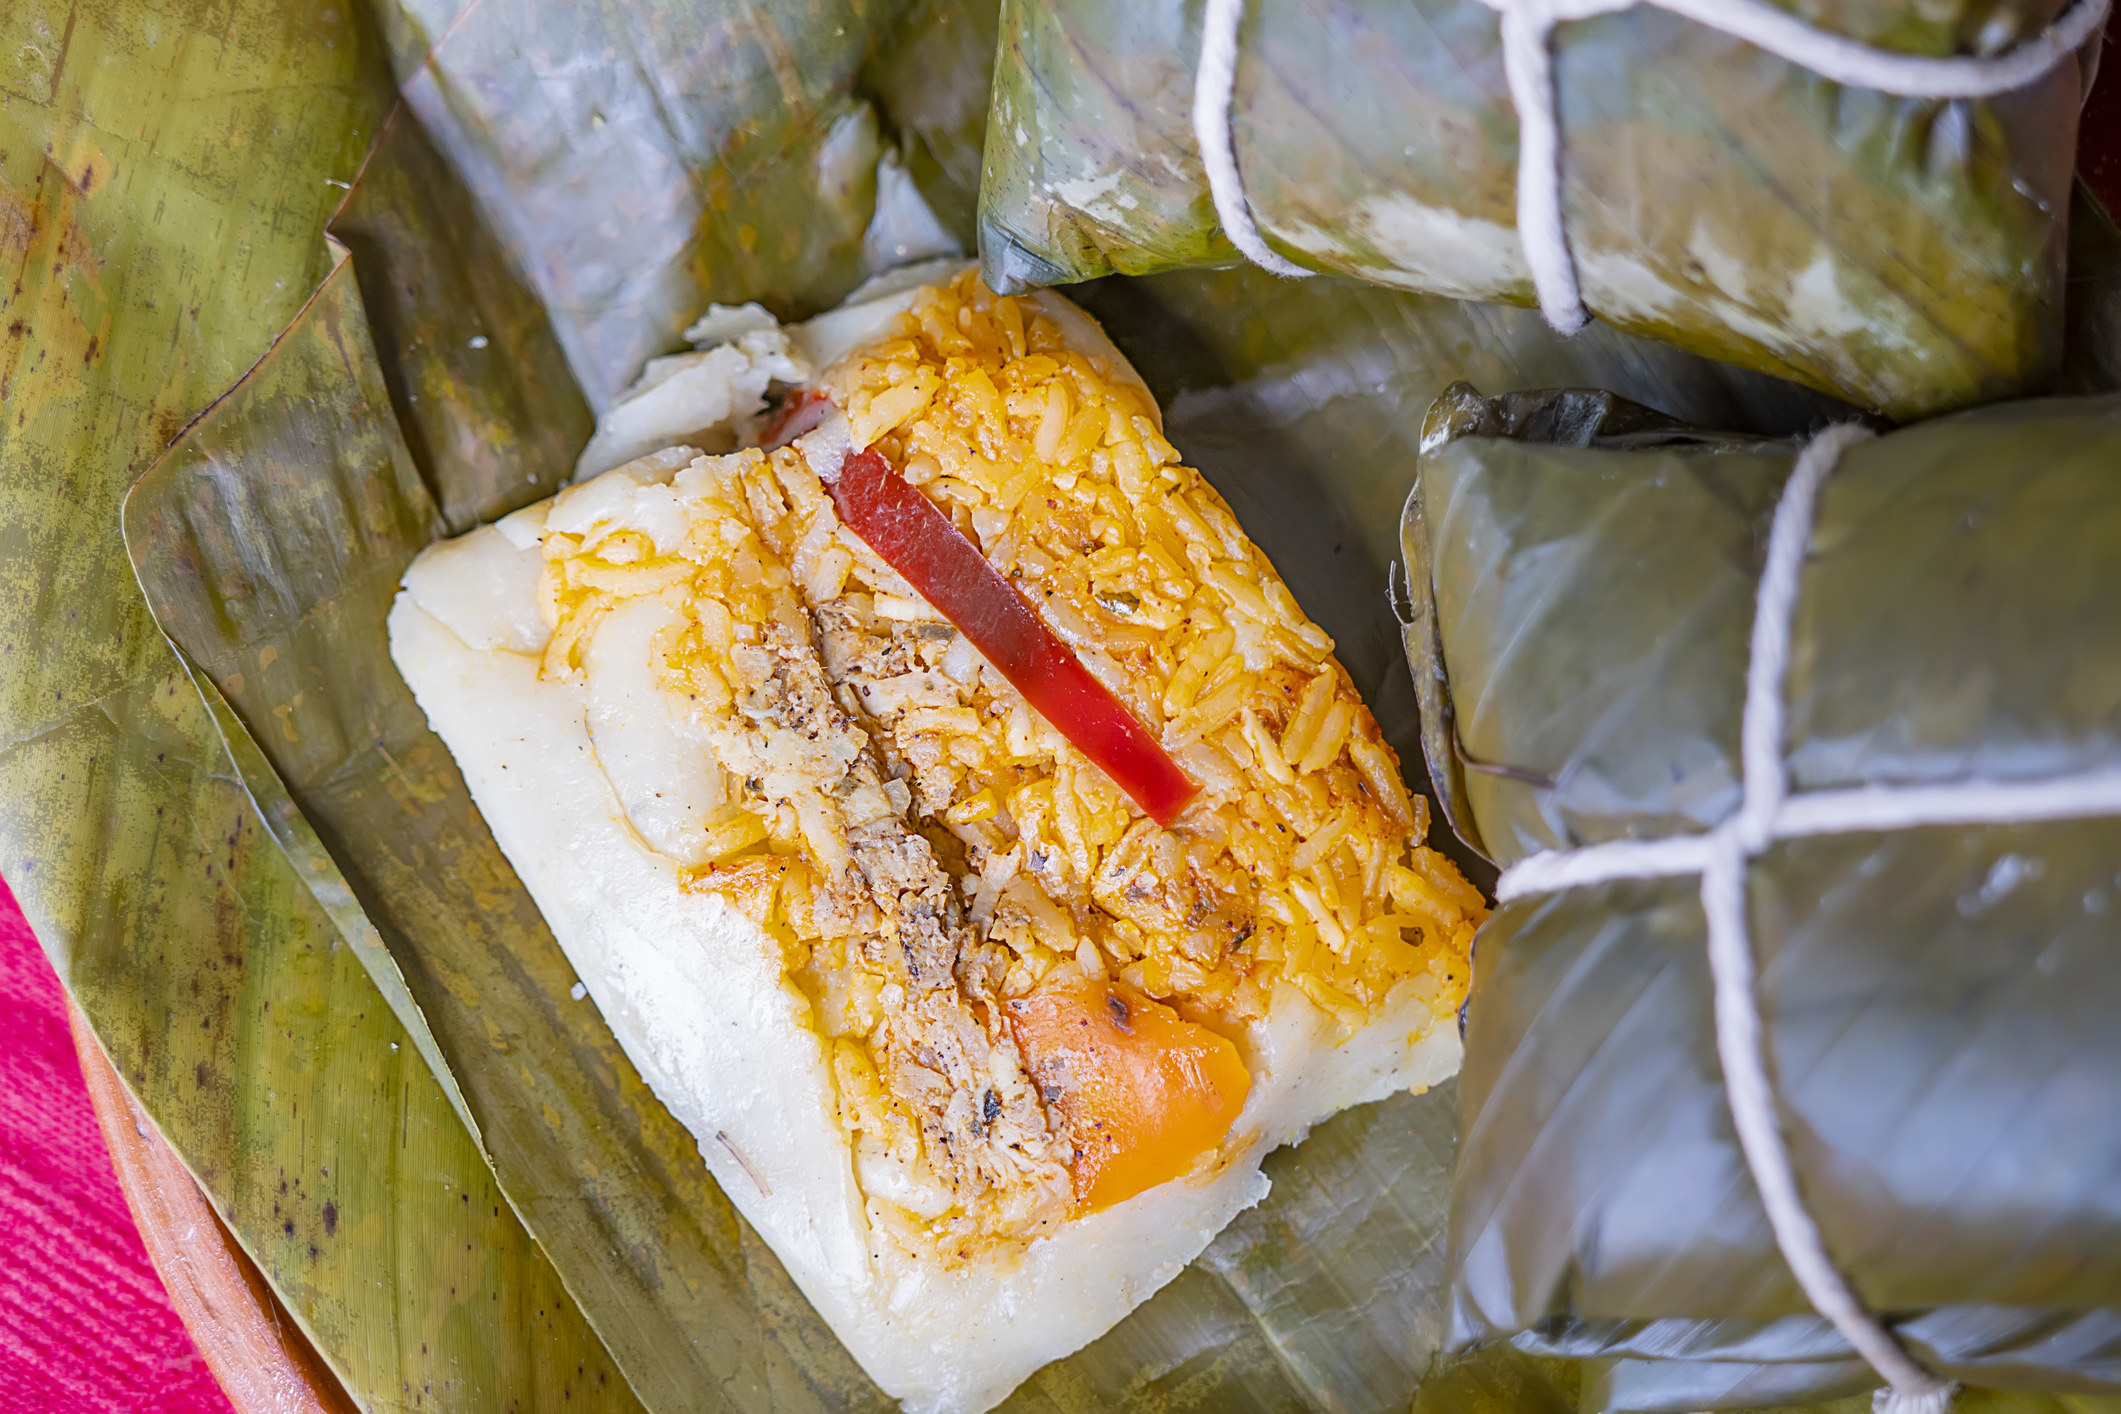 A Mexican tamale ready to eat